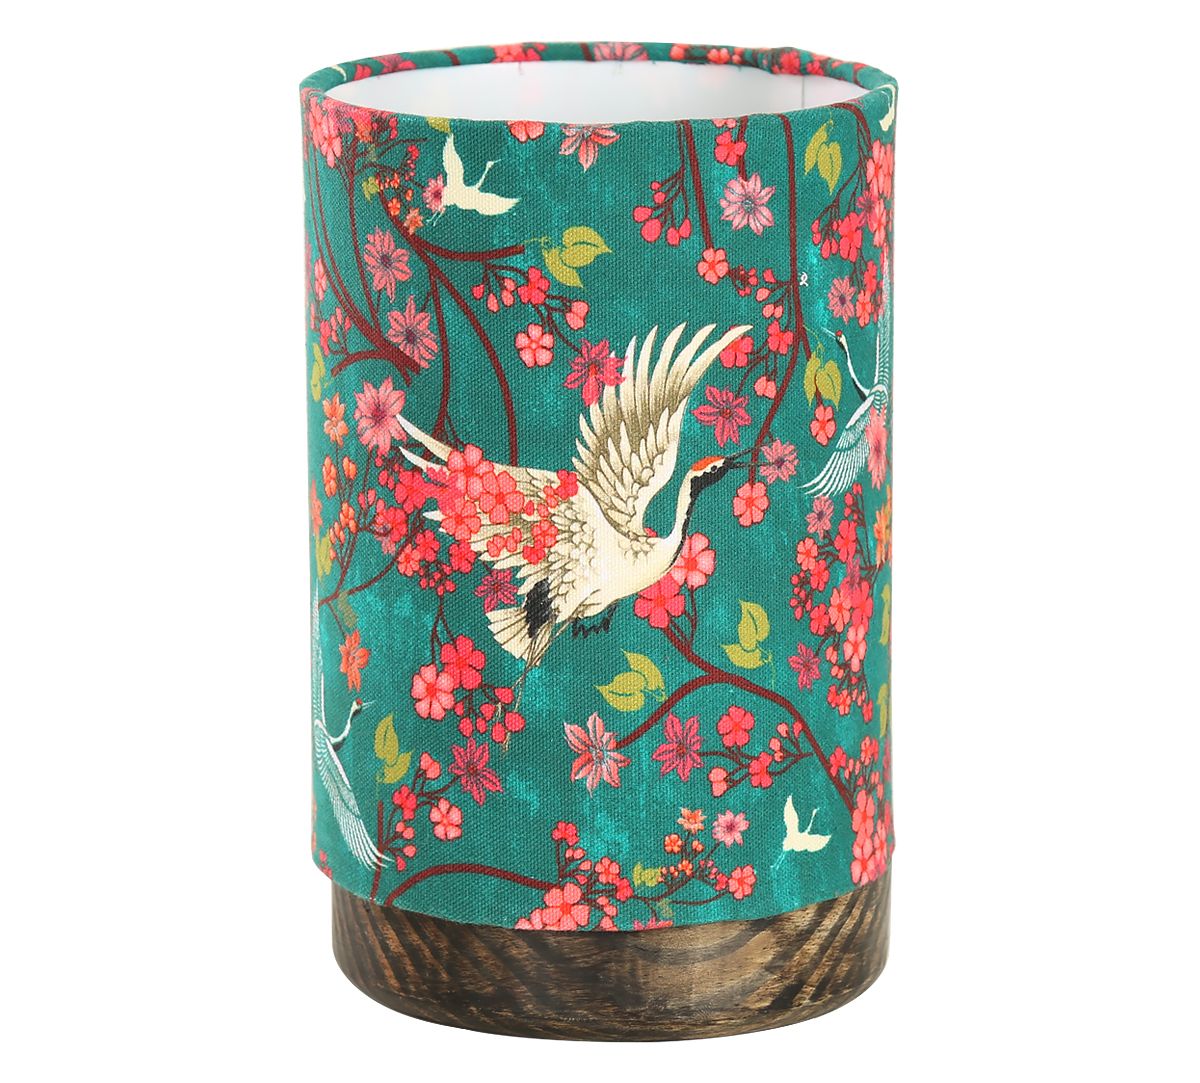 India Circus by Krsnaa Mehta Flight of Cranes Cylindrical Table Lamp